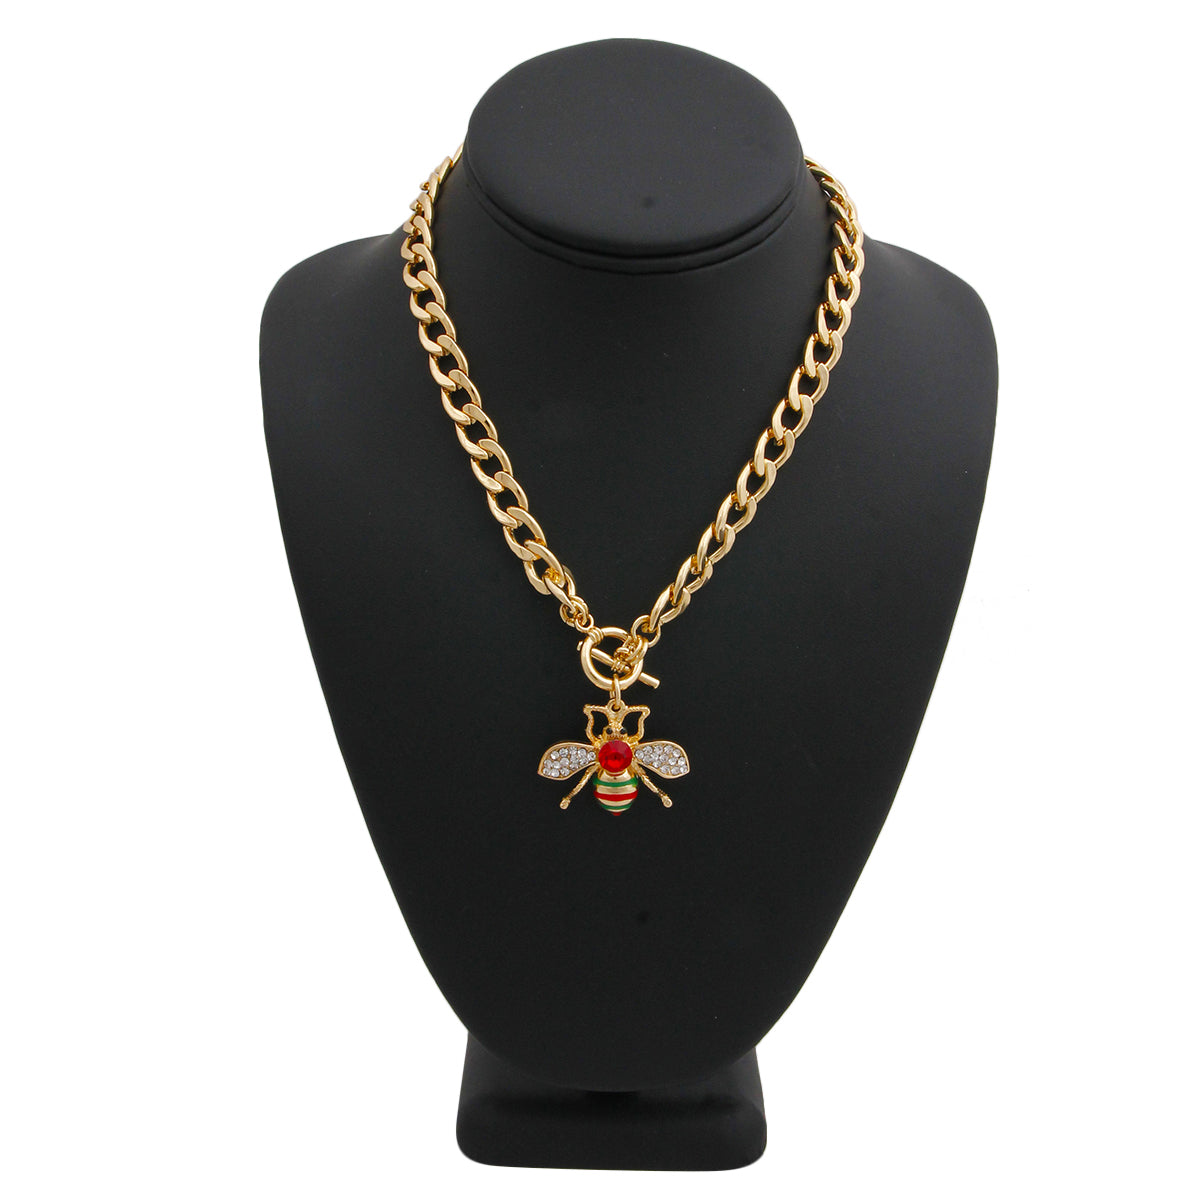 Designer Style Rhinestone Bee Toggle Necklace with Red Rhinestone Detail